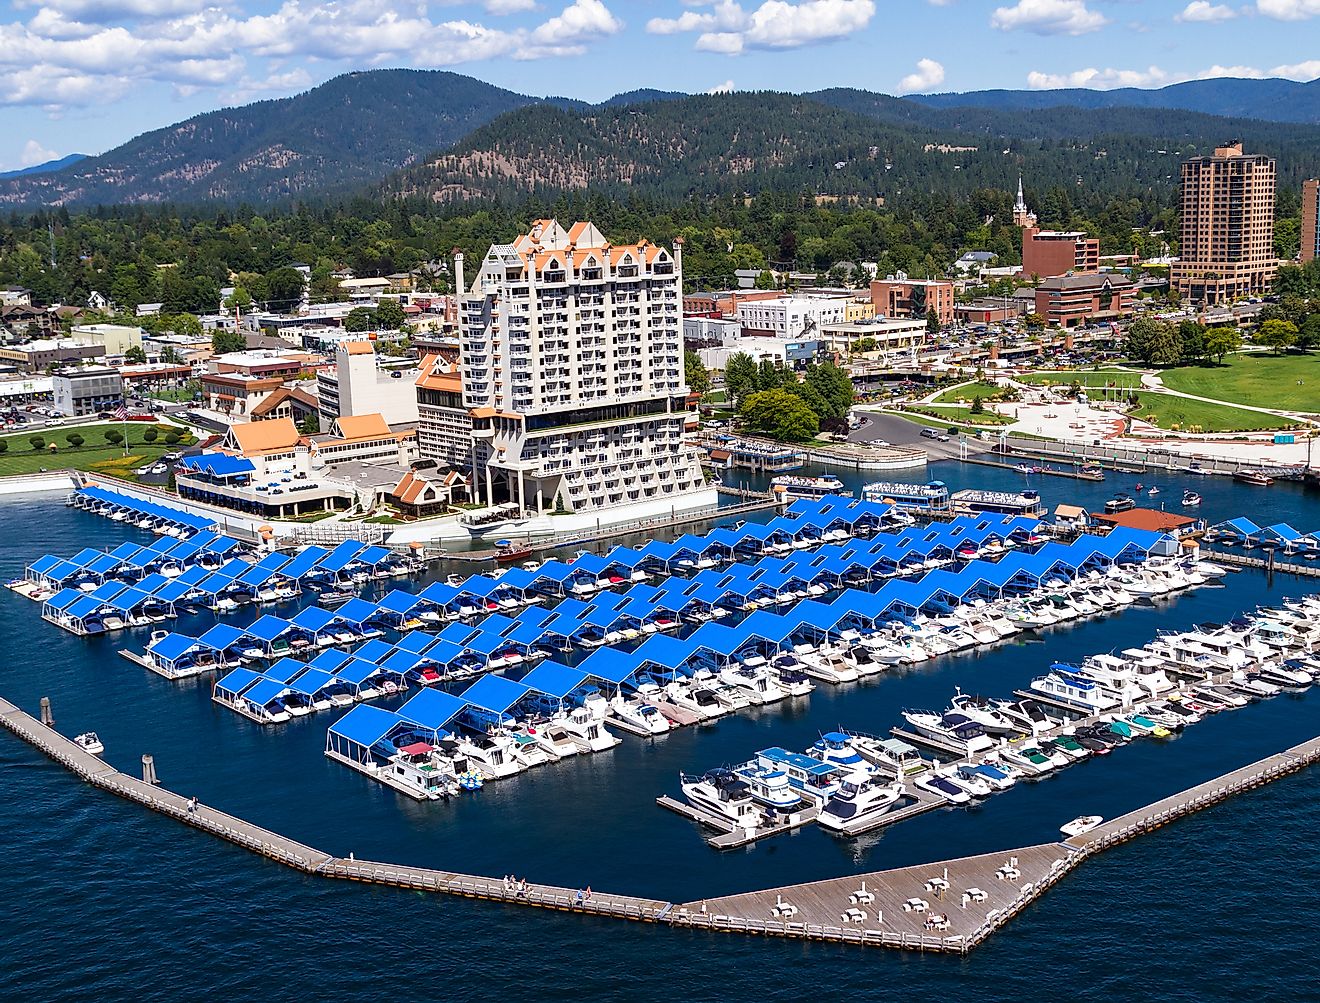 Aerial view of The Coeur d' Alene resort and Marina. Image credit: Nature's Charm via shutterstock